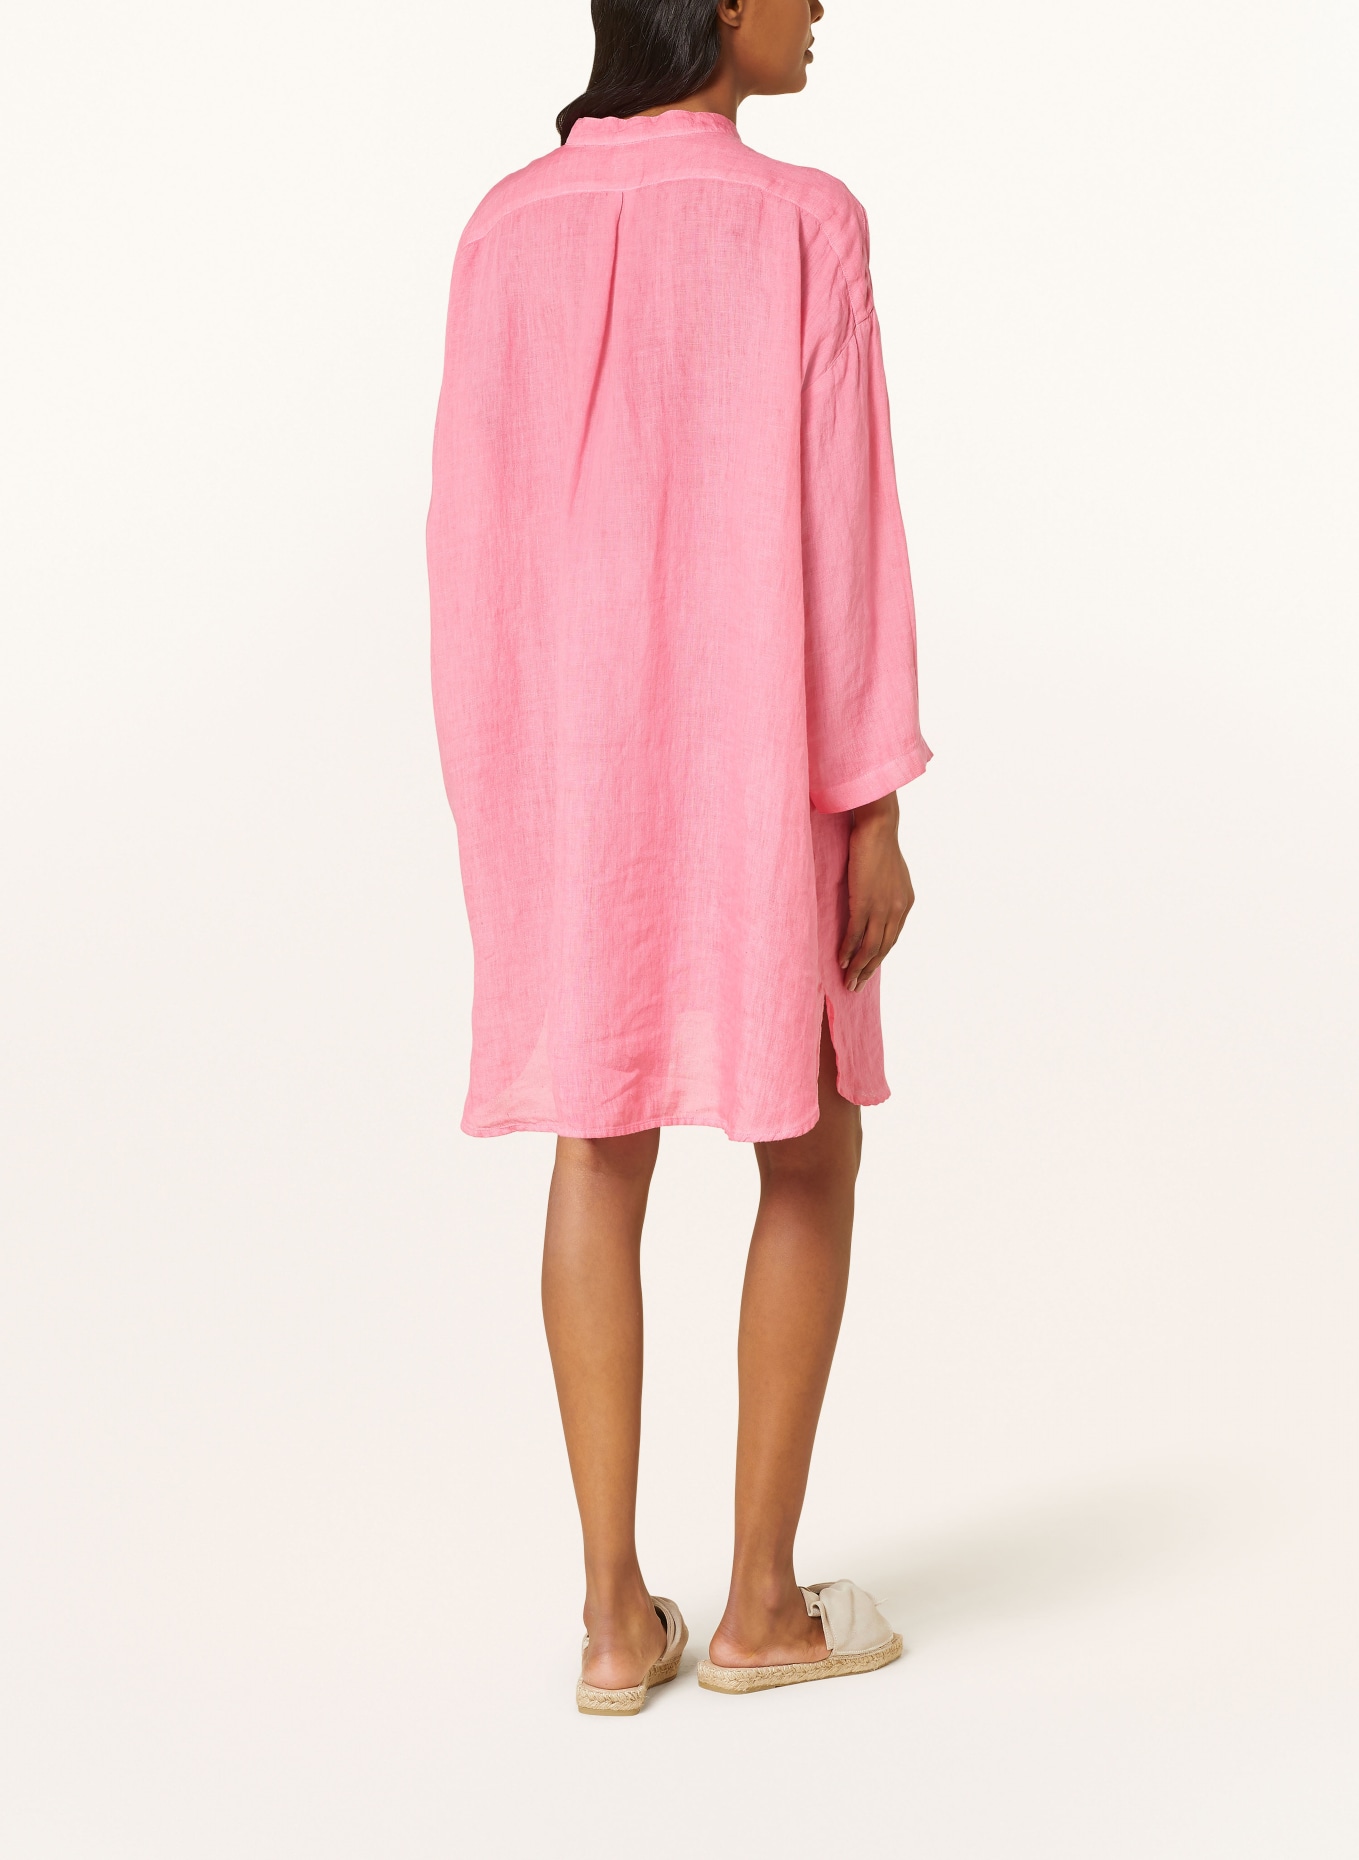 120%lino Beach dress made of linen, Color: PINK (Image 3)